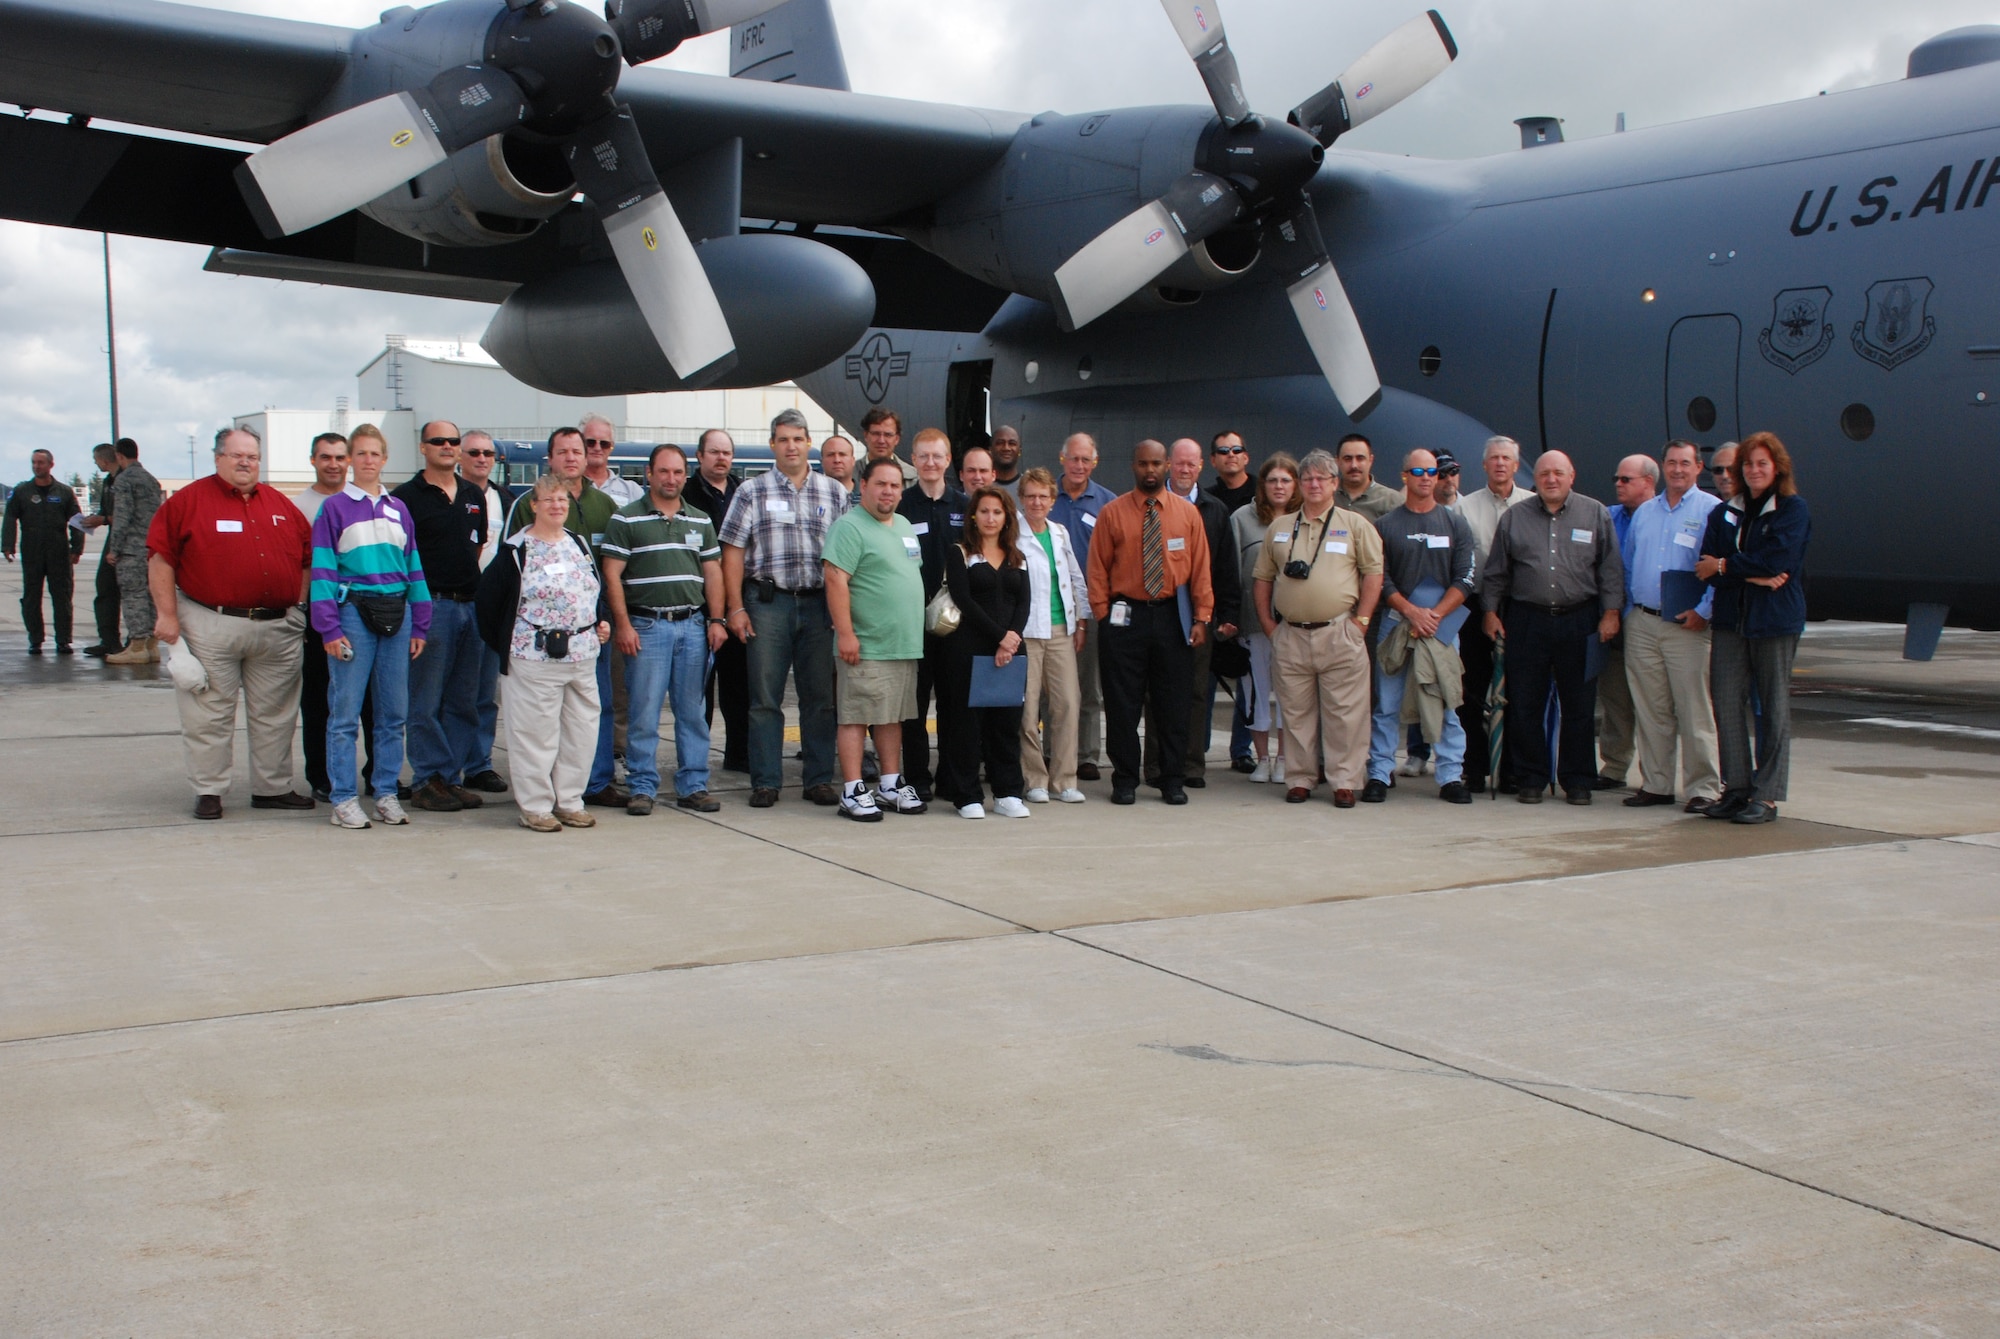 The moment will be forever etched in digital history for a group of local employers, prior to their flight of a life time the group gathered for a photo. Guardsman?s and reservist?s bosses had the opportunity to visit the Niagara Falls Air Reserve Station on the first joint 107th and 914th Bosses? Day held on Aug. 8. (Air Force Photo/ Master Sgt. Paul Brundage)